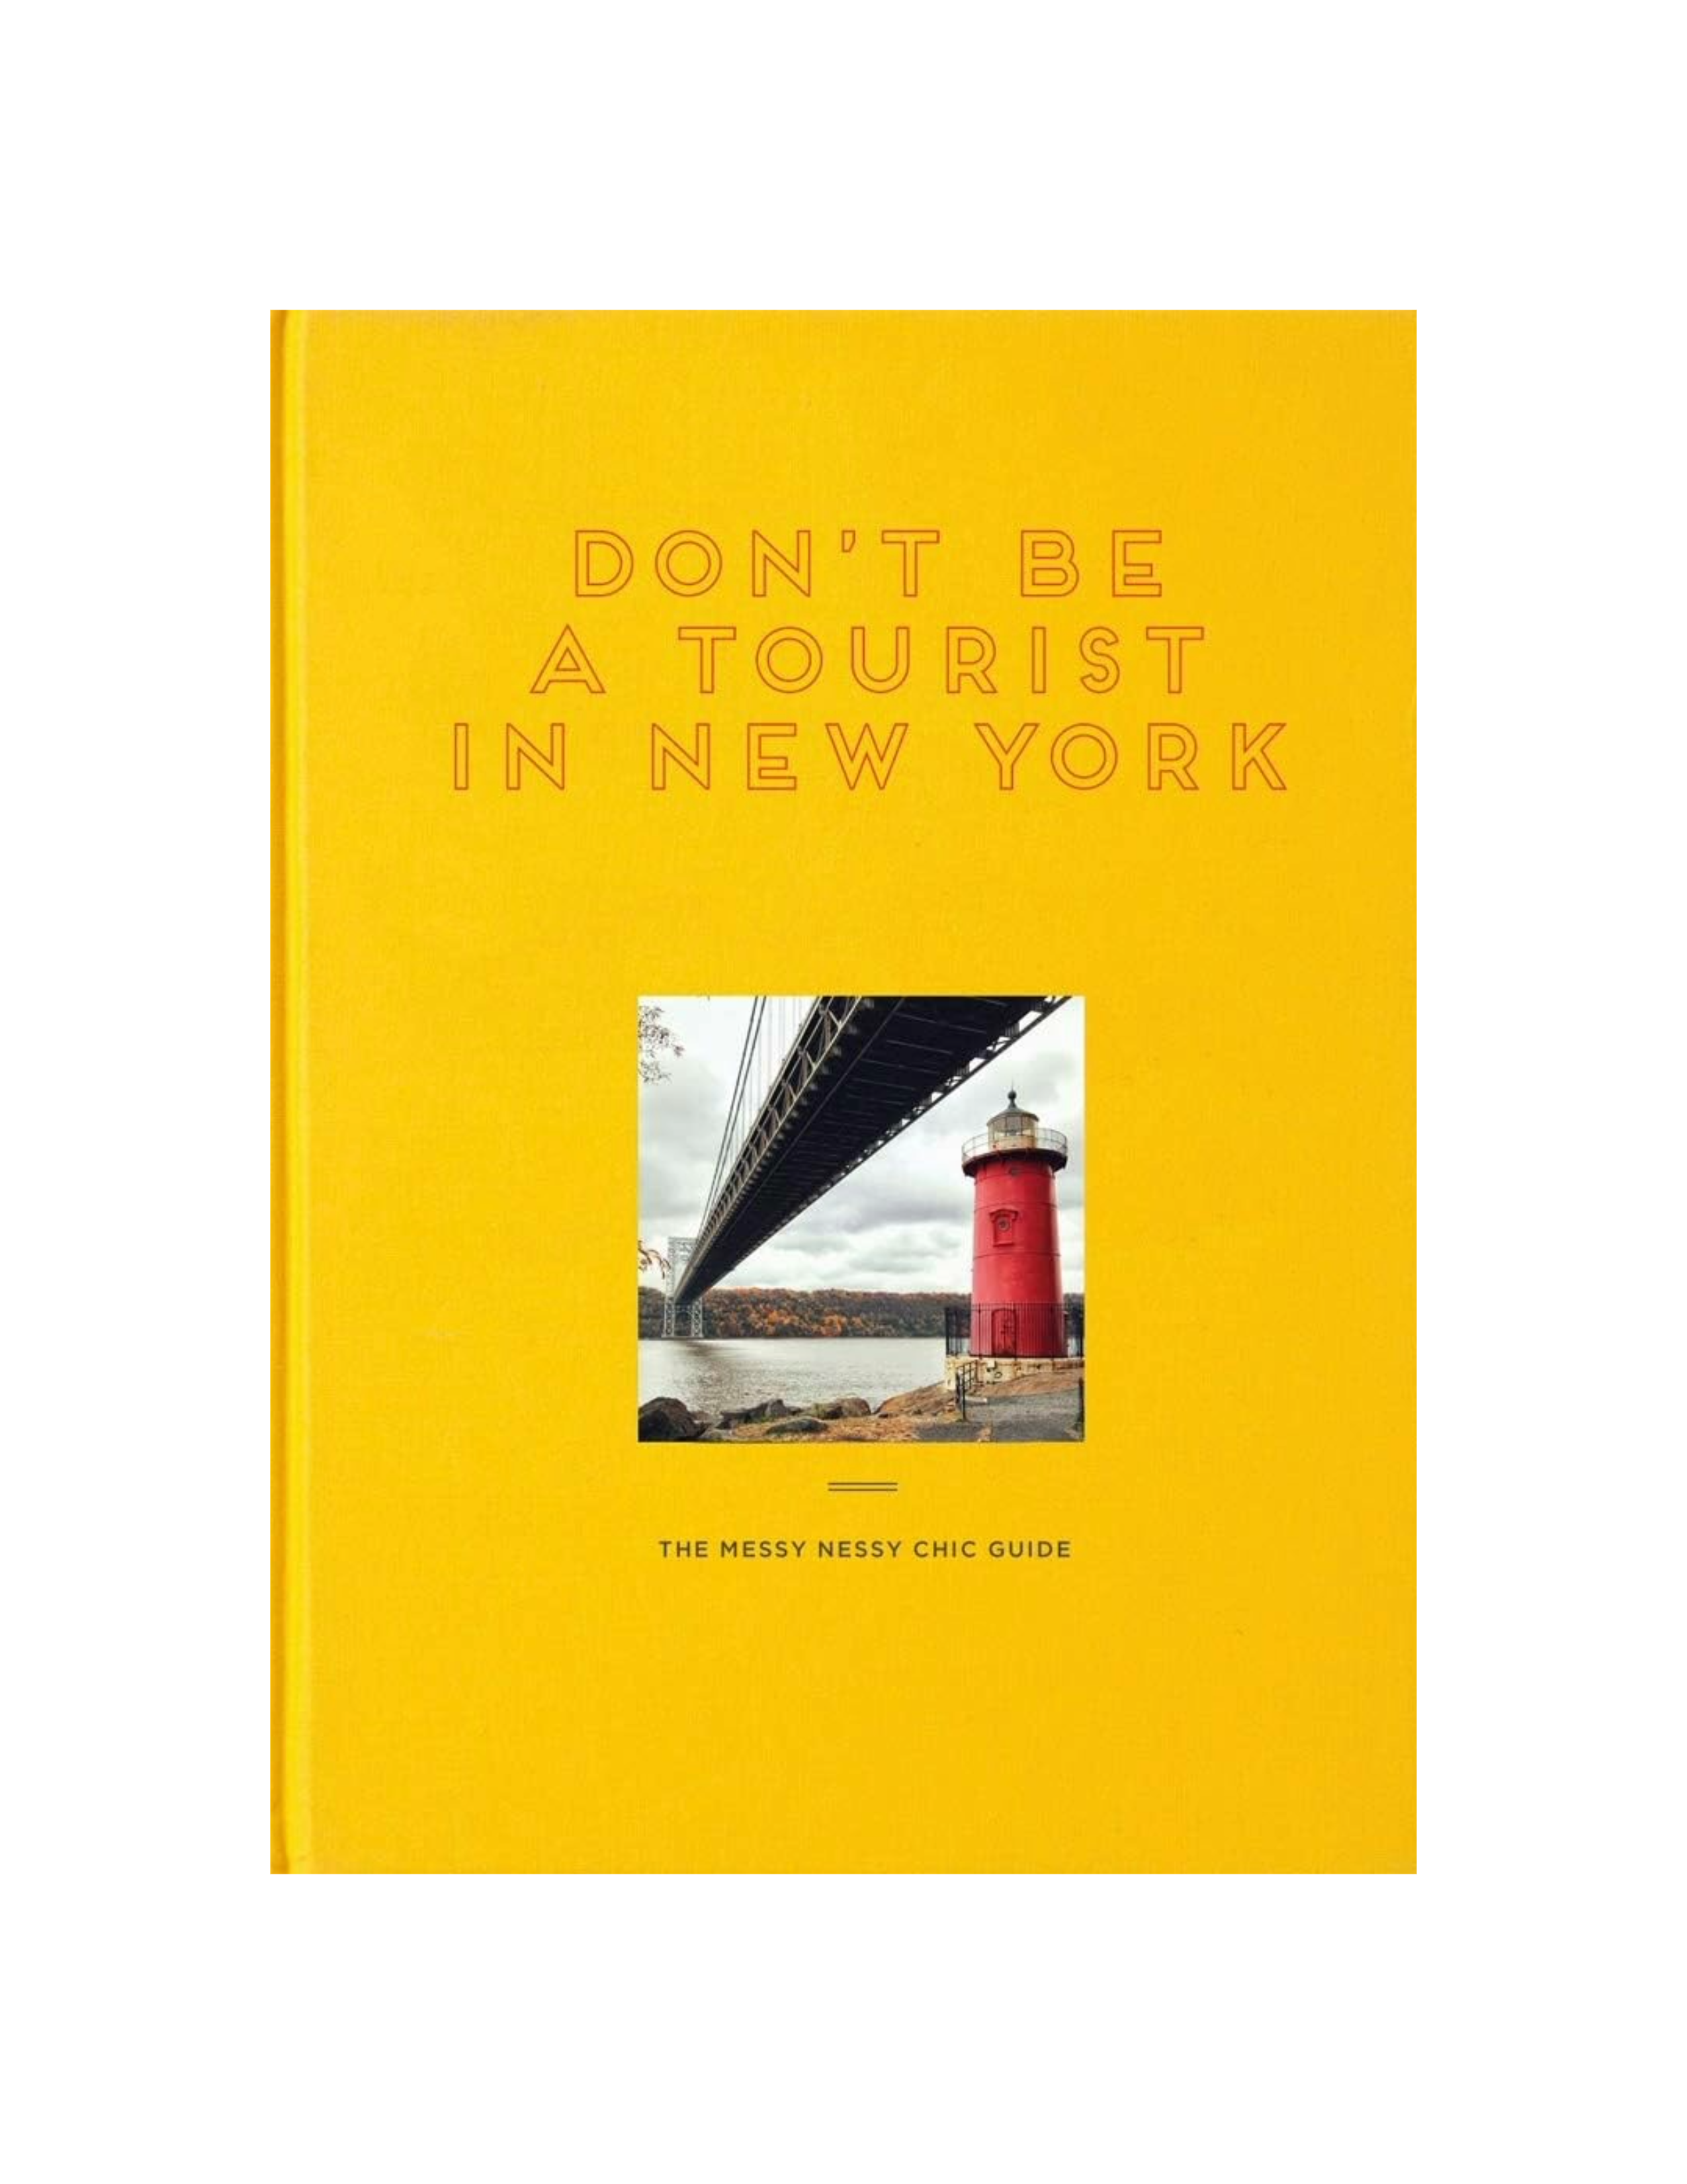 Don't be a Tourist in New York: The Messy Nessy Chic Guide